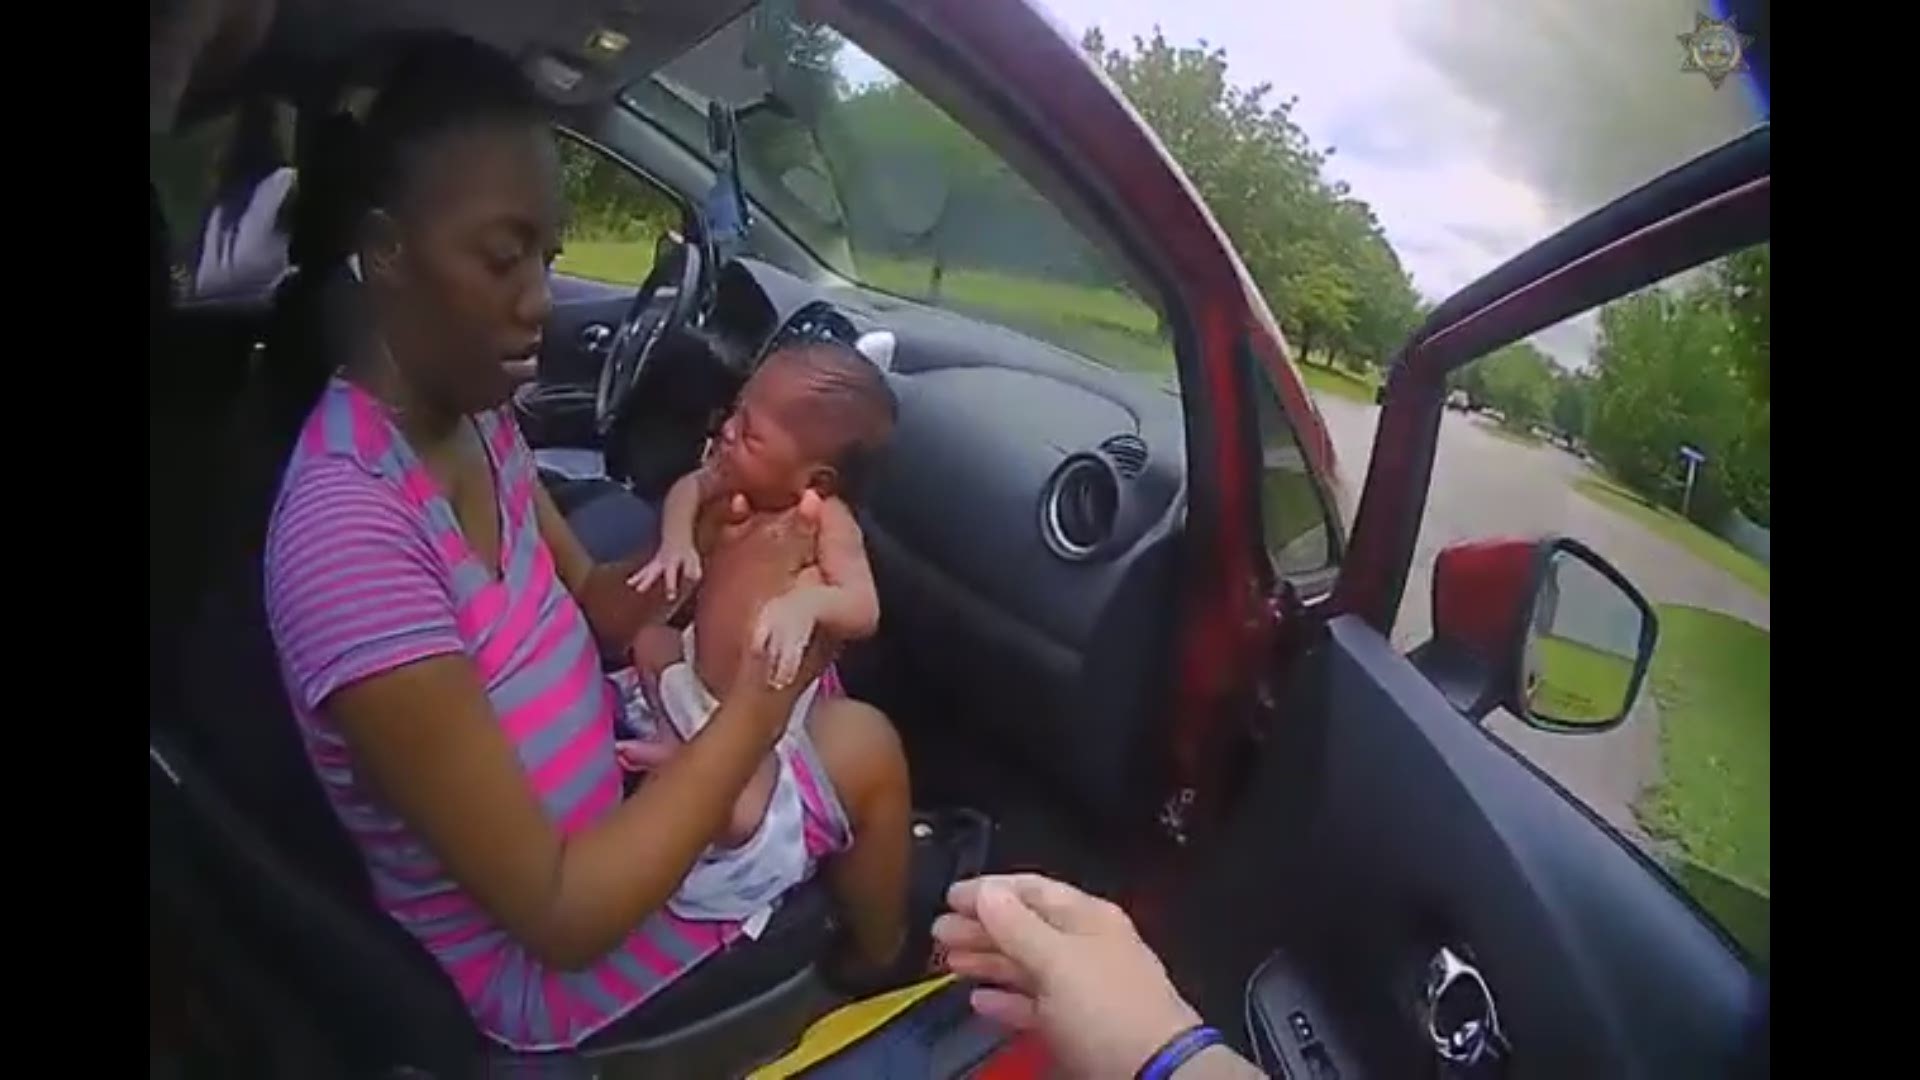 This South Carolina deputy initially pulled the car over for speeding. Once he noticed the 12-day-old baby had stopped breathing -- he jumped into action.